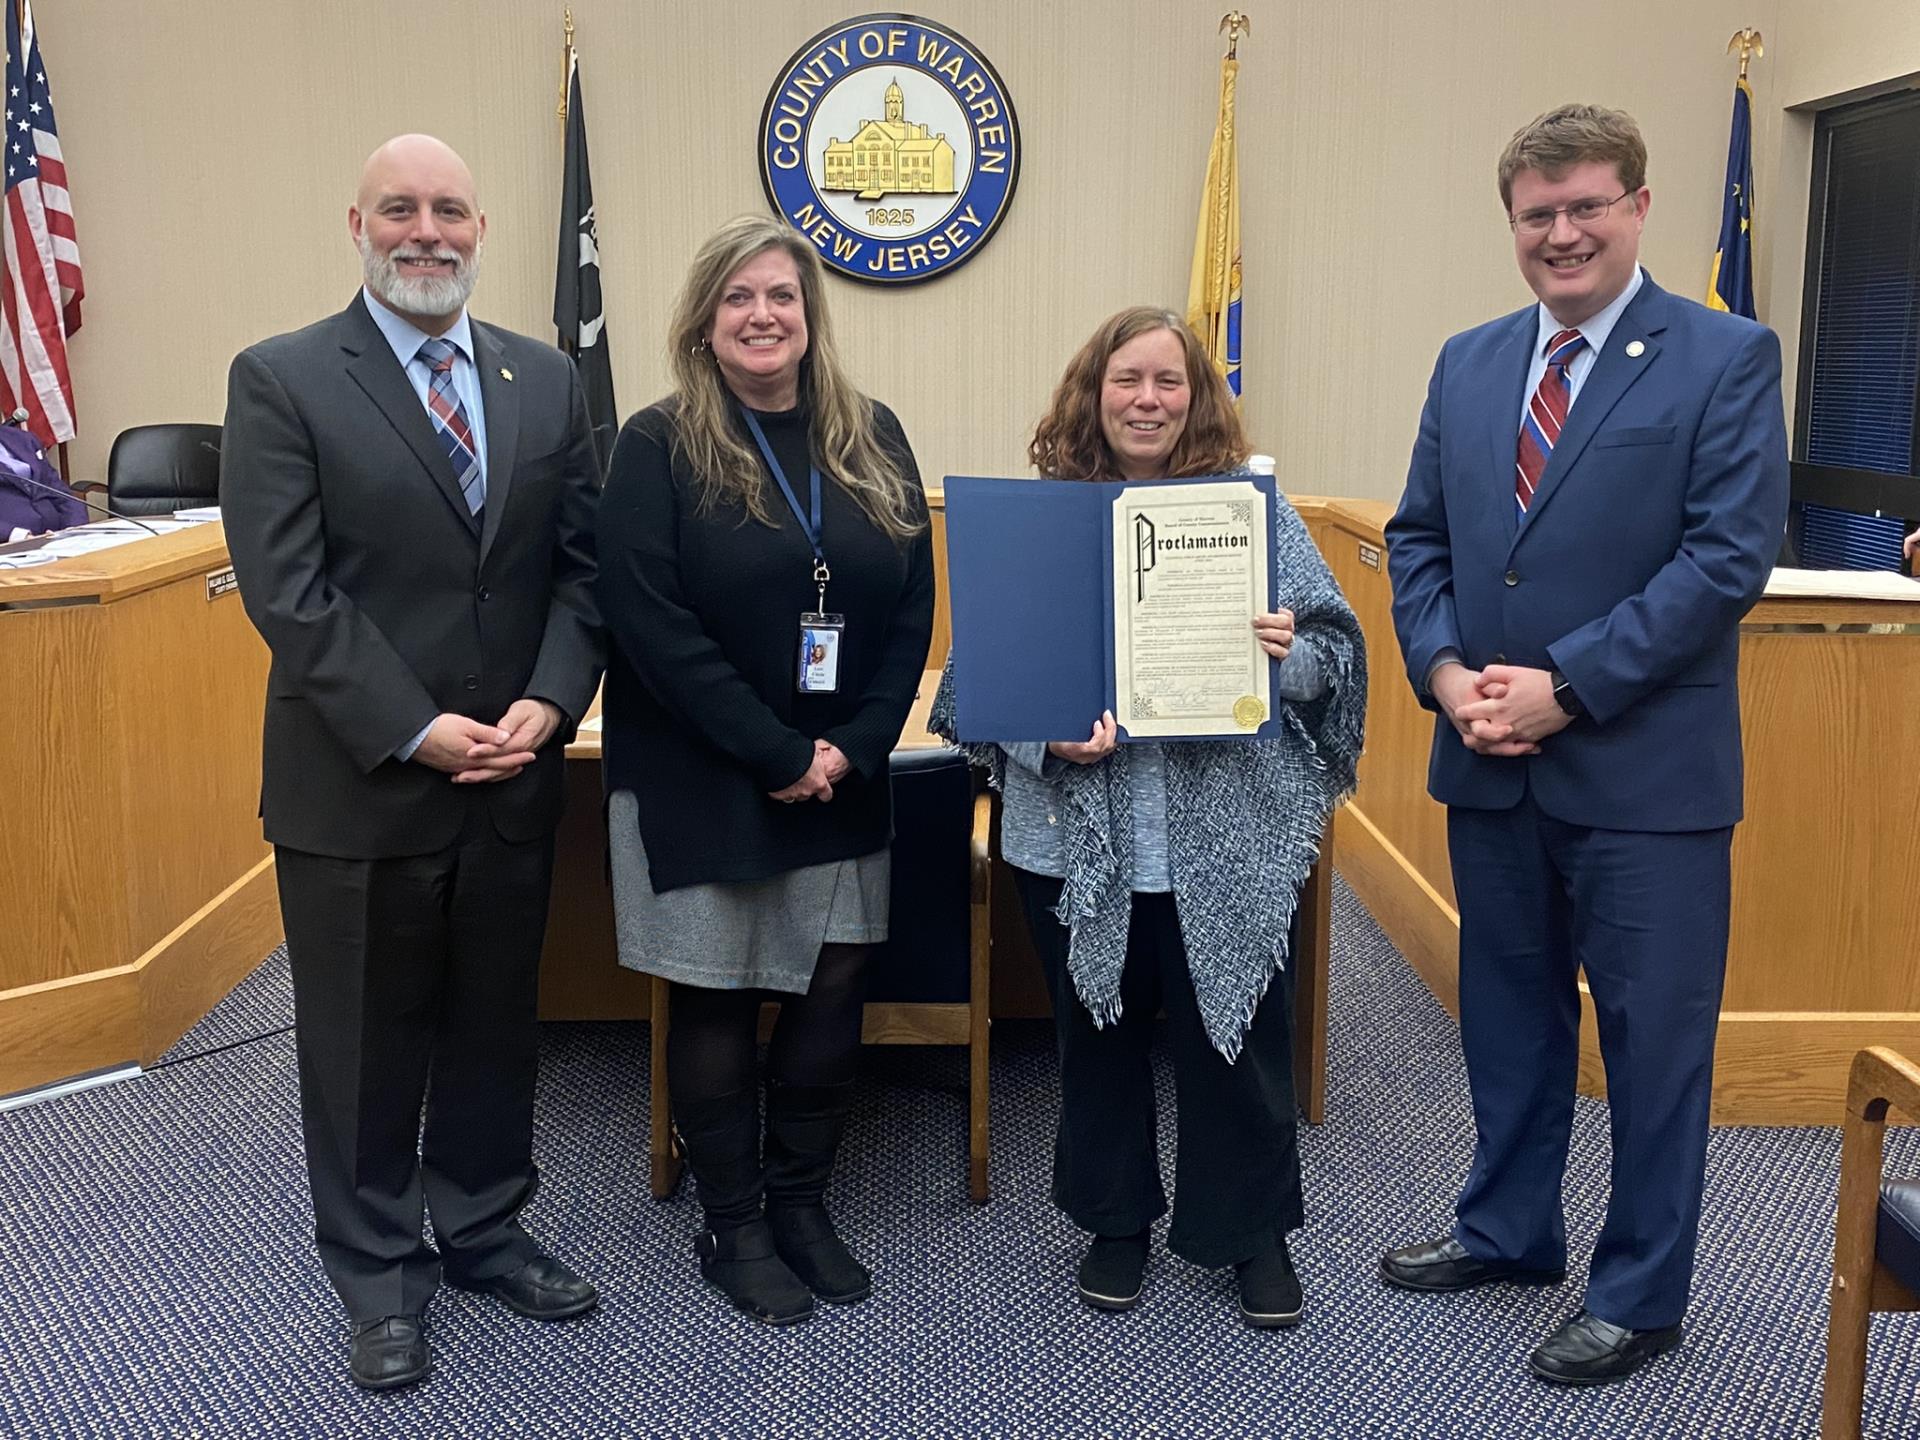 CASA SHaW Recognized as National Child Abuse Awareness Month is Proclaimed